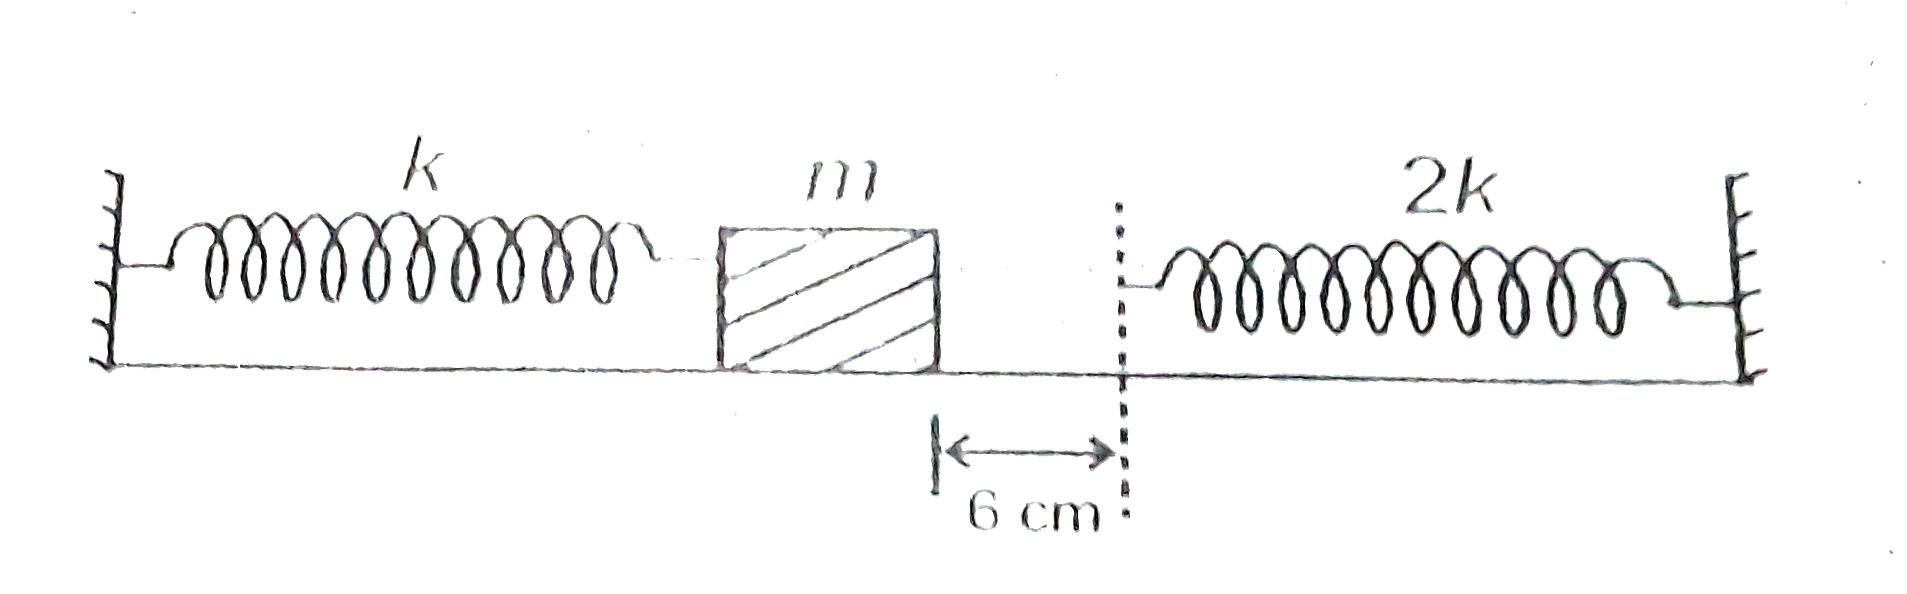 The block of M in the figure is connected to a left spring (k(1)= k). The right spring (k(2) = 2k) is fixed to the other wall such that its free end is 6 cm away from blocm. In this situation, entire system isin equilibrium. Now, block is displaced to left by 6 sqrt(2) cm and released. Determine the time period of oscillatory motion of the block.